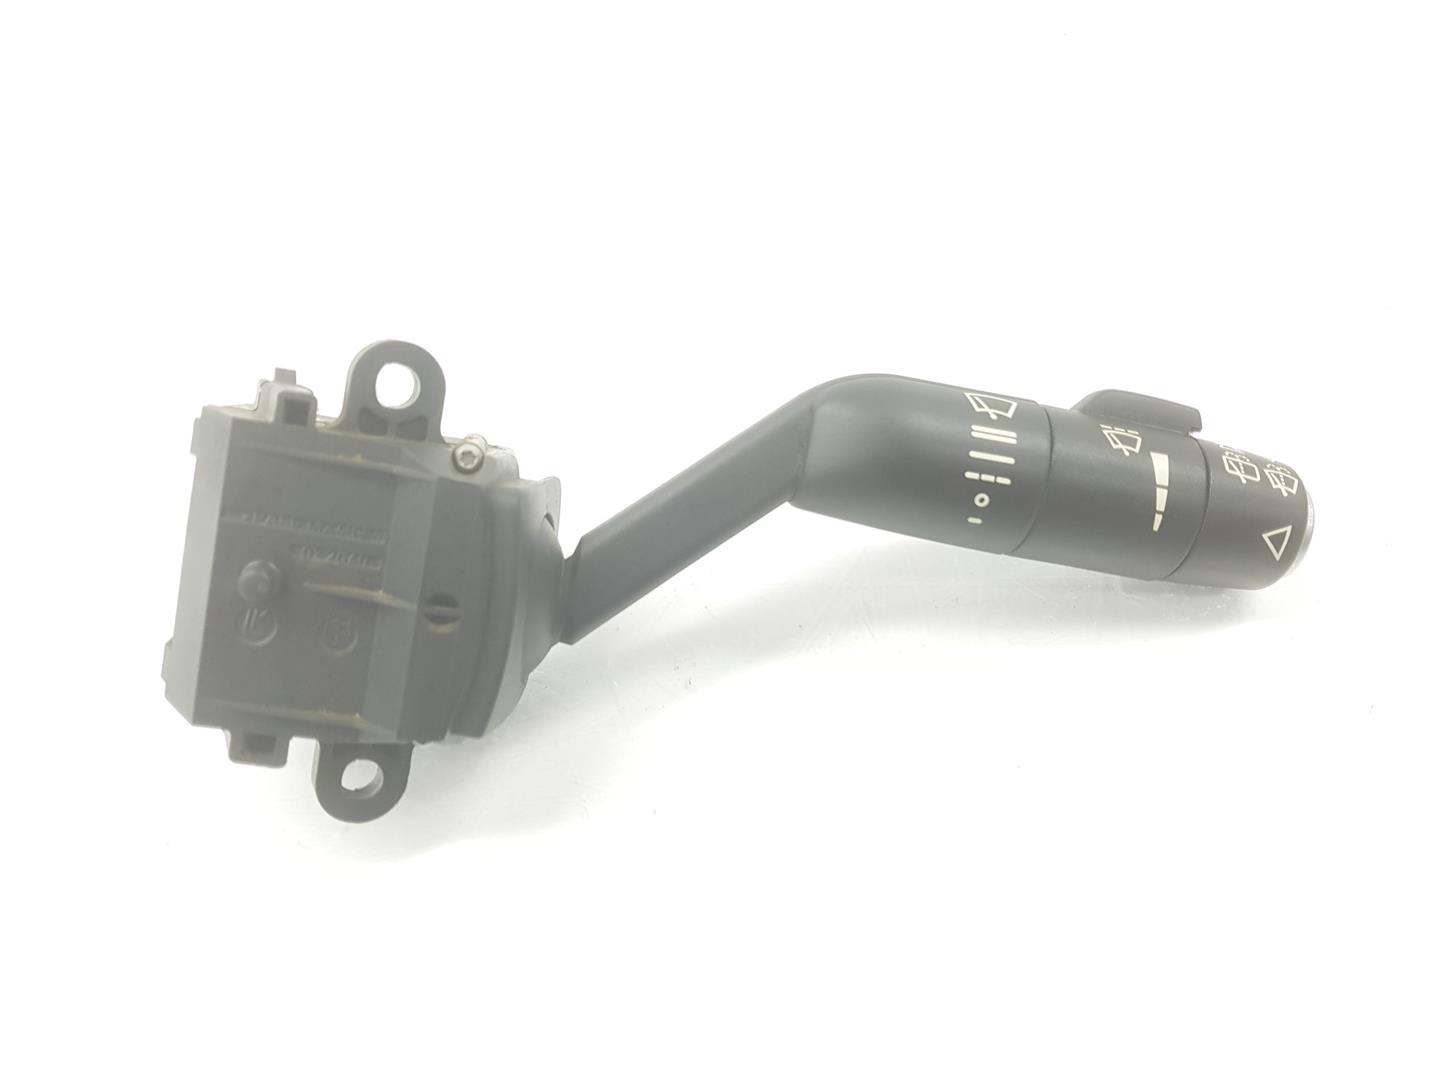 LAND ROVER Range Rover 3 generation (2002-2012) Indicator Wiper Stalk Switch XPE000010WQD, 17A553 19907447